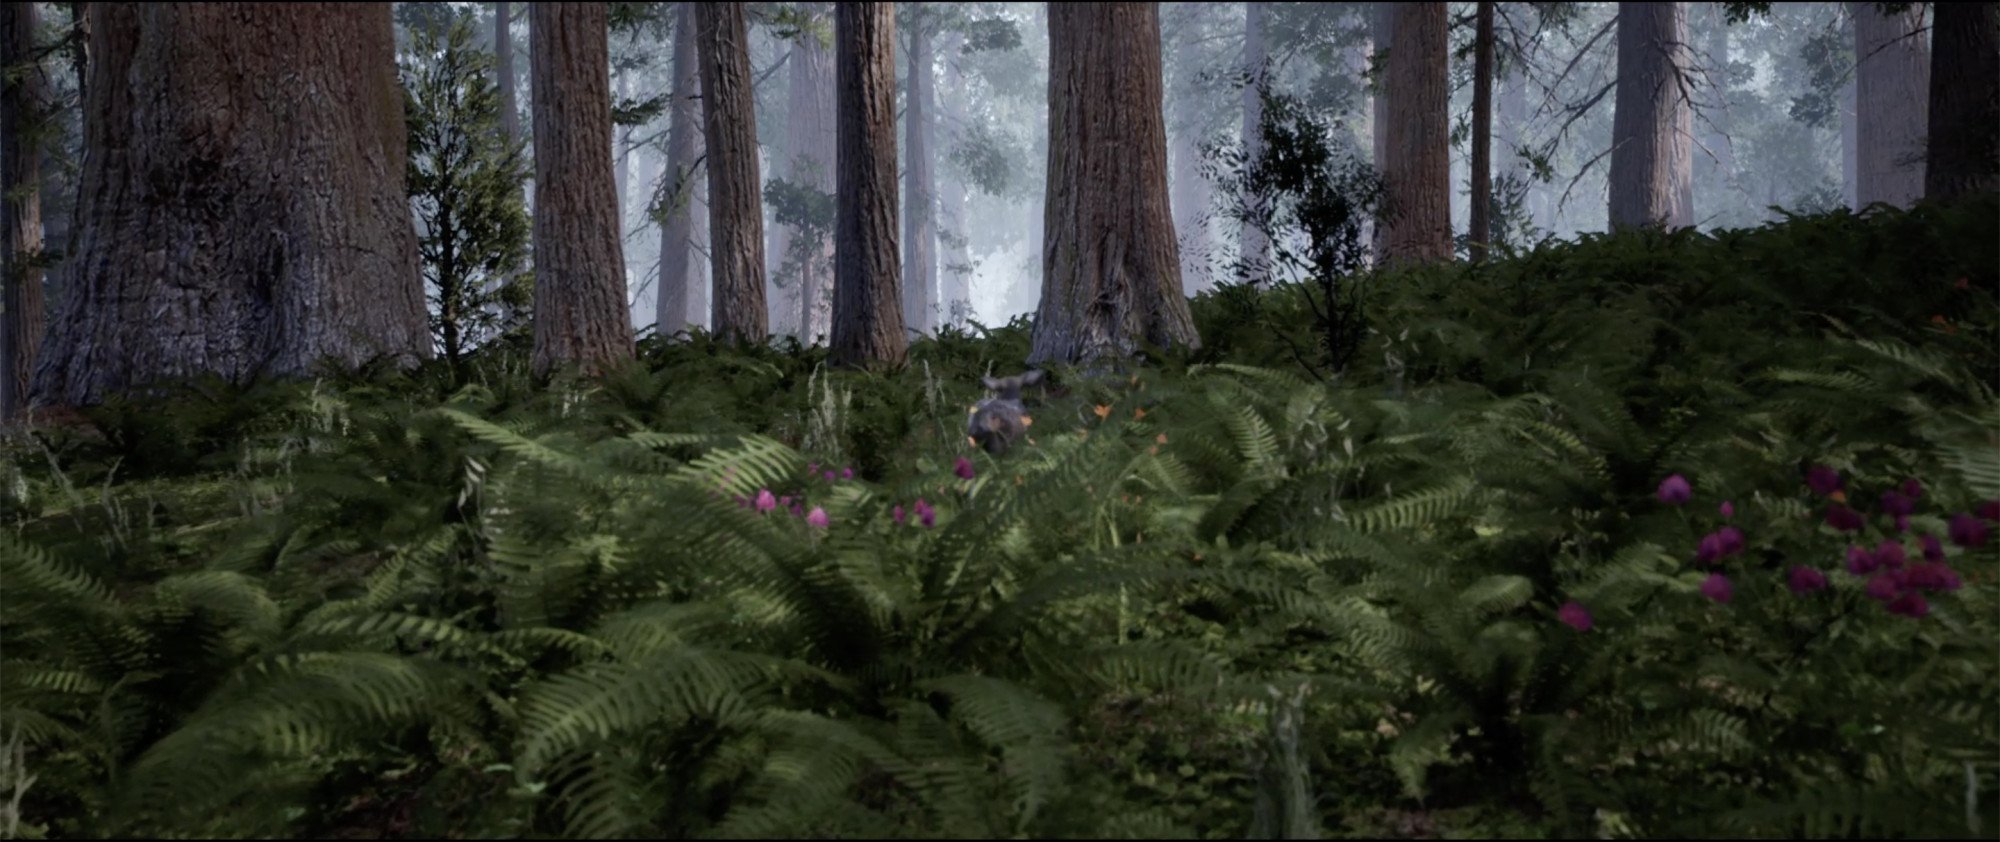 Grant Stevens, <em>Fawn in the Forest,</em> 2020, live streamed procedurally generated computer graphics with sound, assisted by Pat Younis. Courtesy the artist and Sullivan + Strumpf, Sydney.